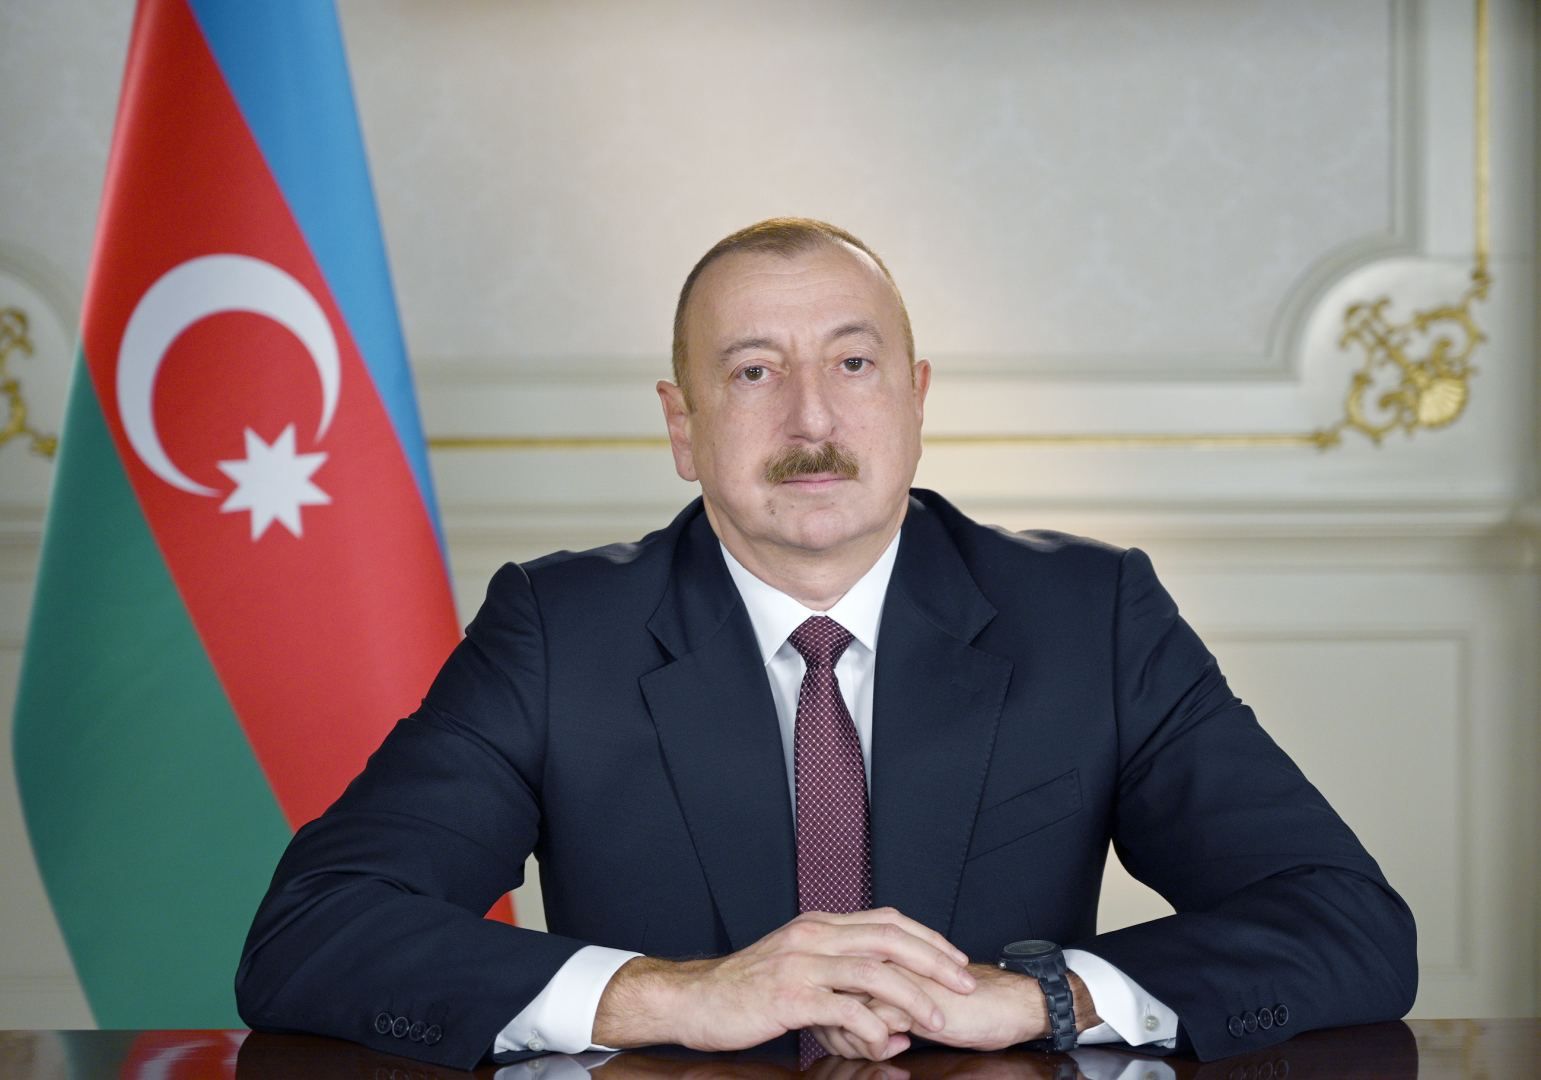 Azerbaijan to prepare new law "On the rights of the child"